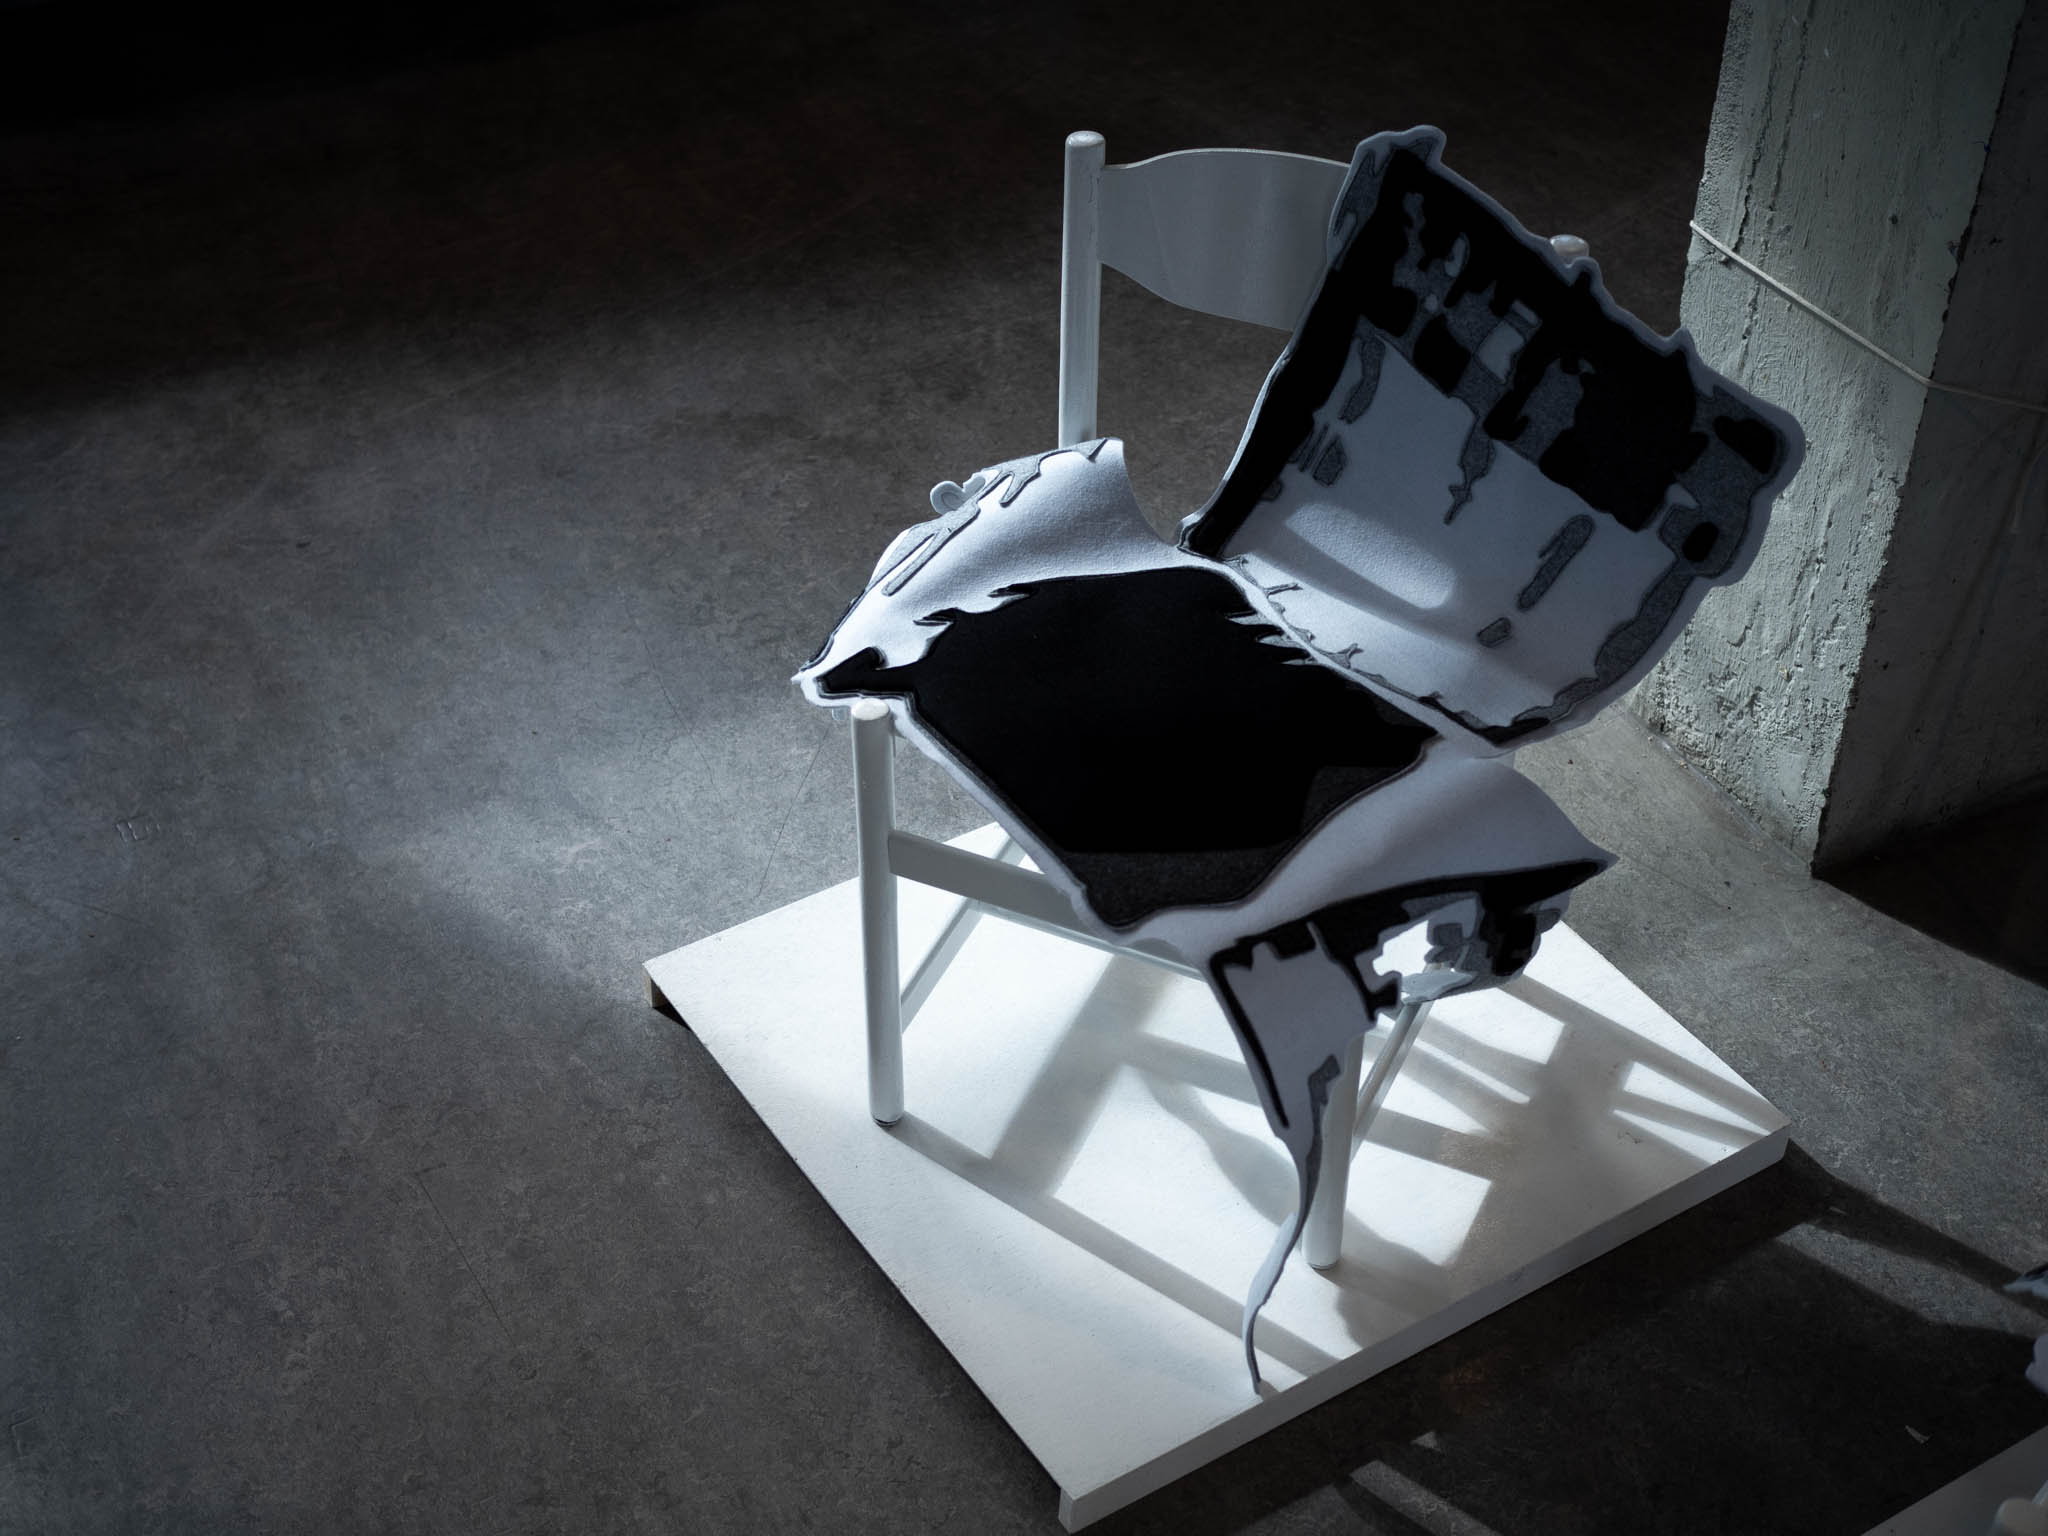 unfolded chair tappestry 2